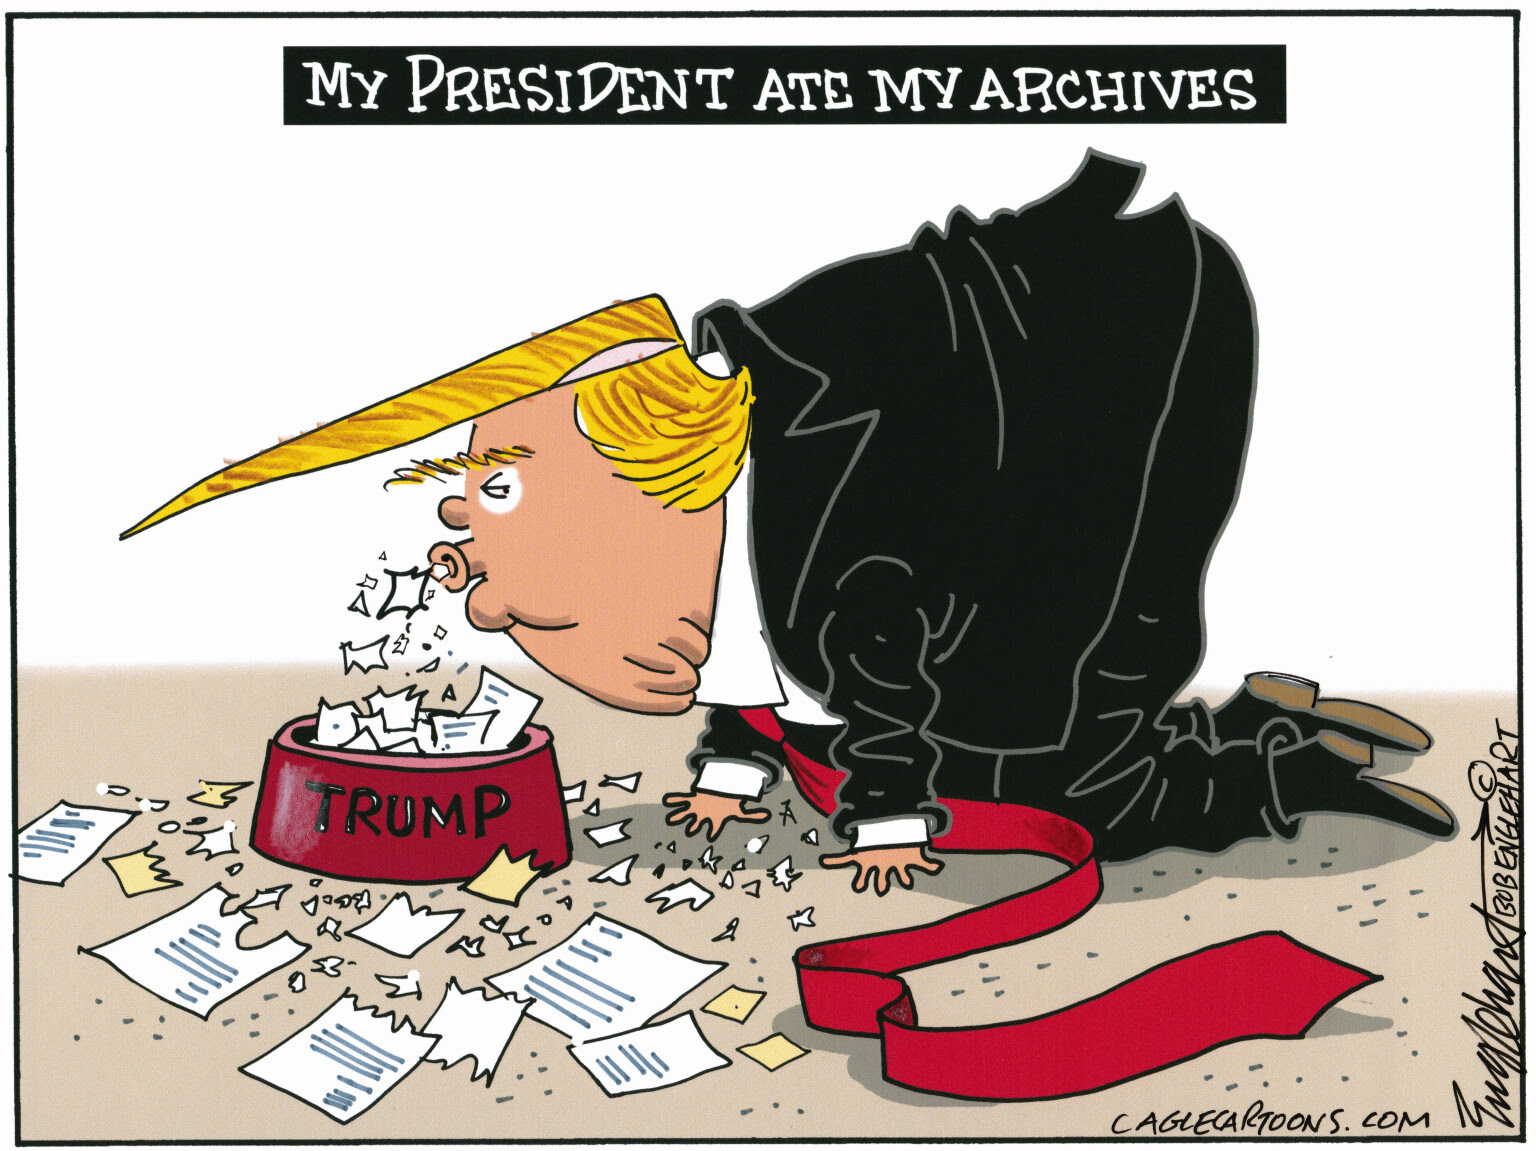 Trump eats the National Archives documents.